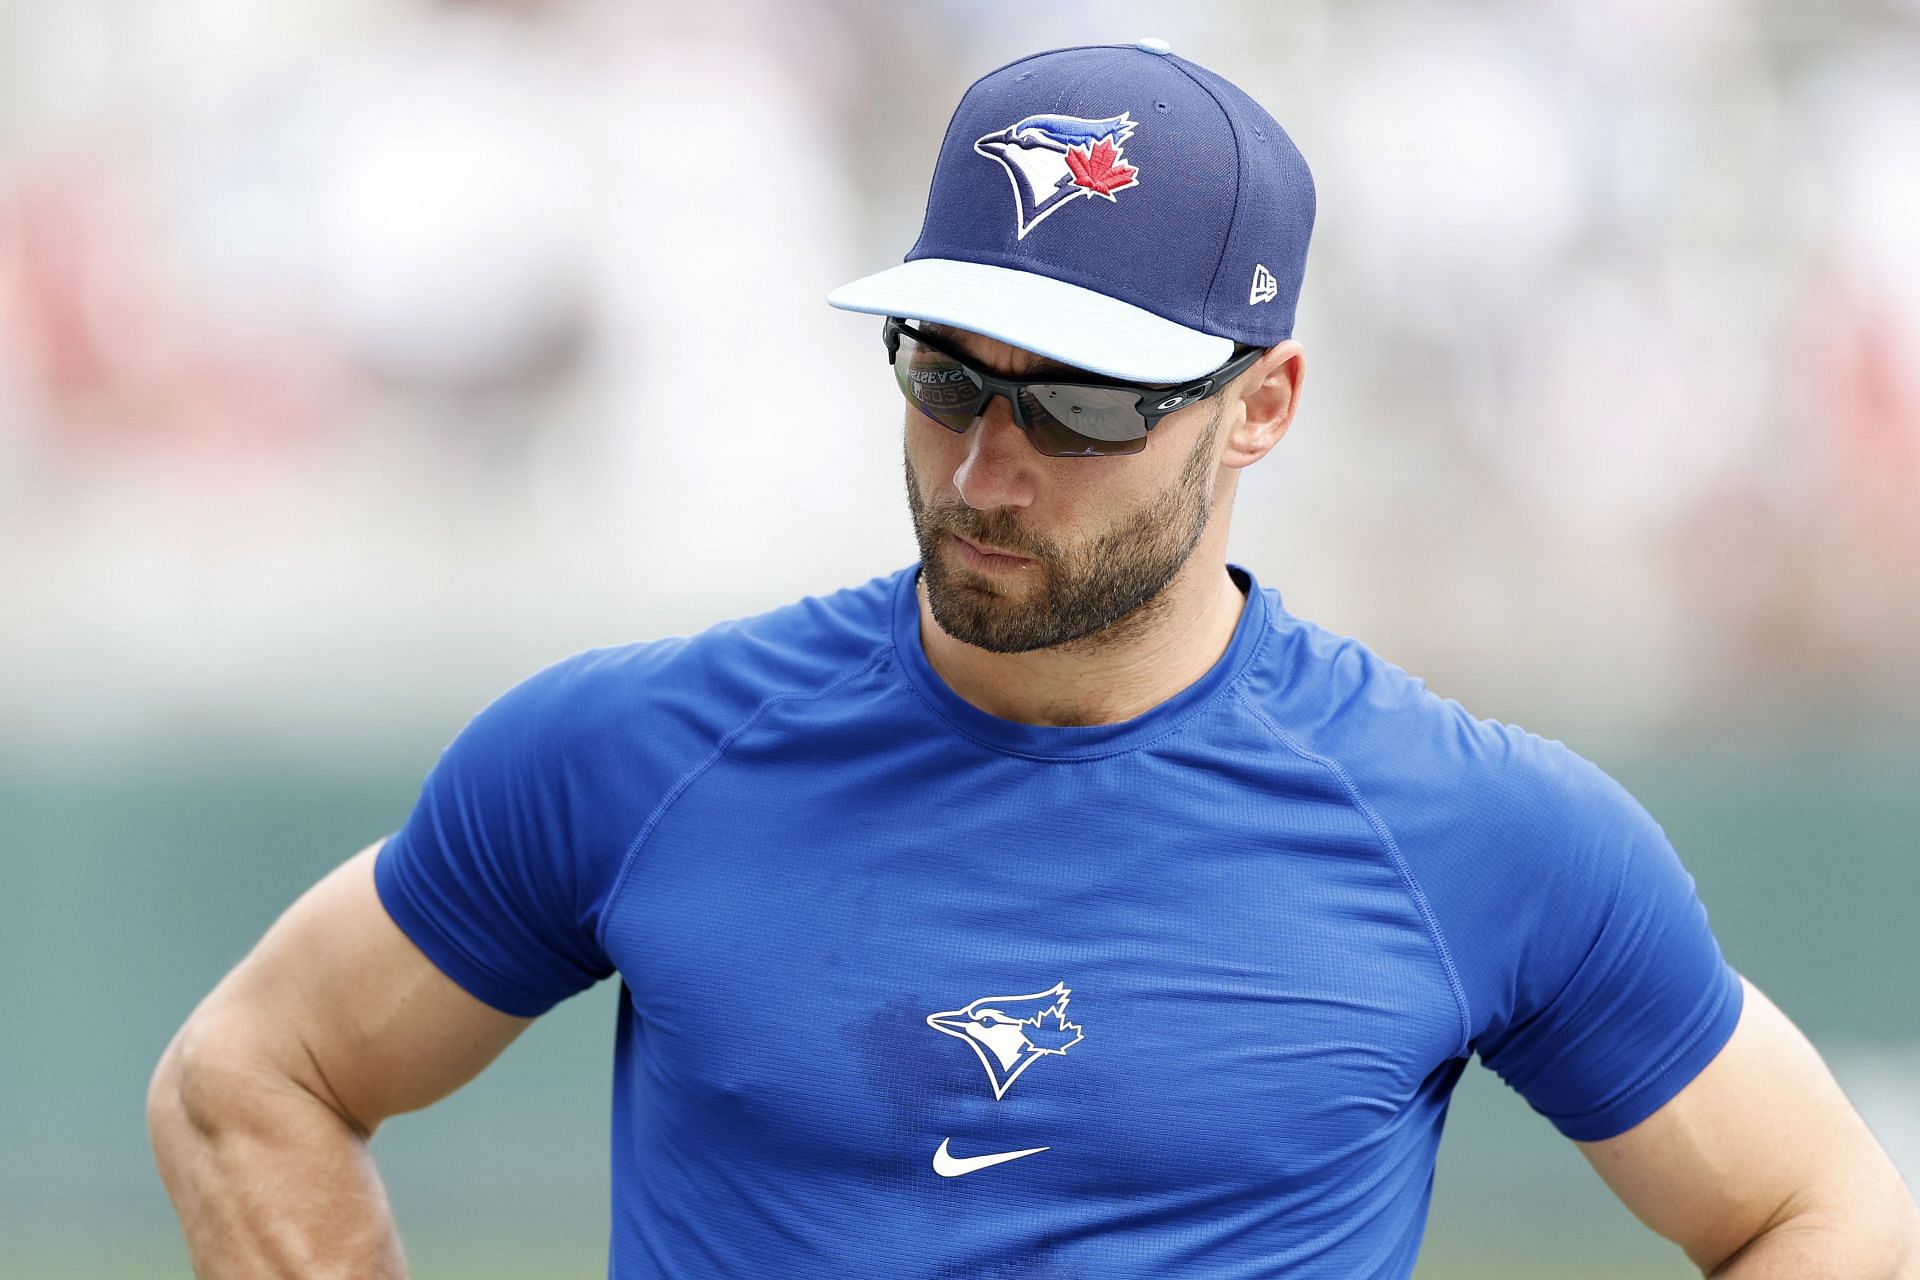 Kevin Kiermaier is on his way back to Toronto